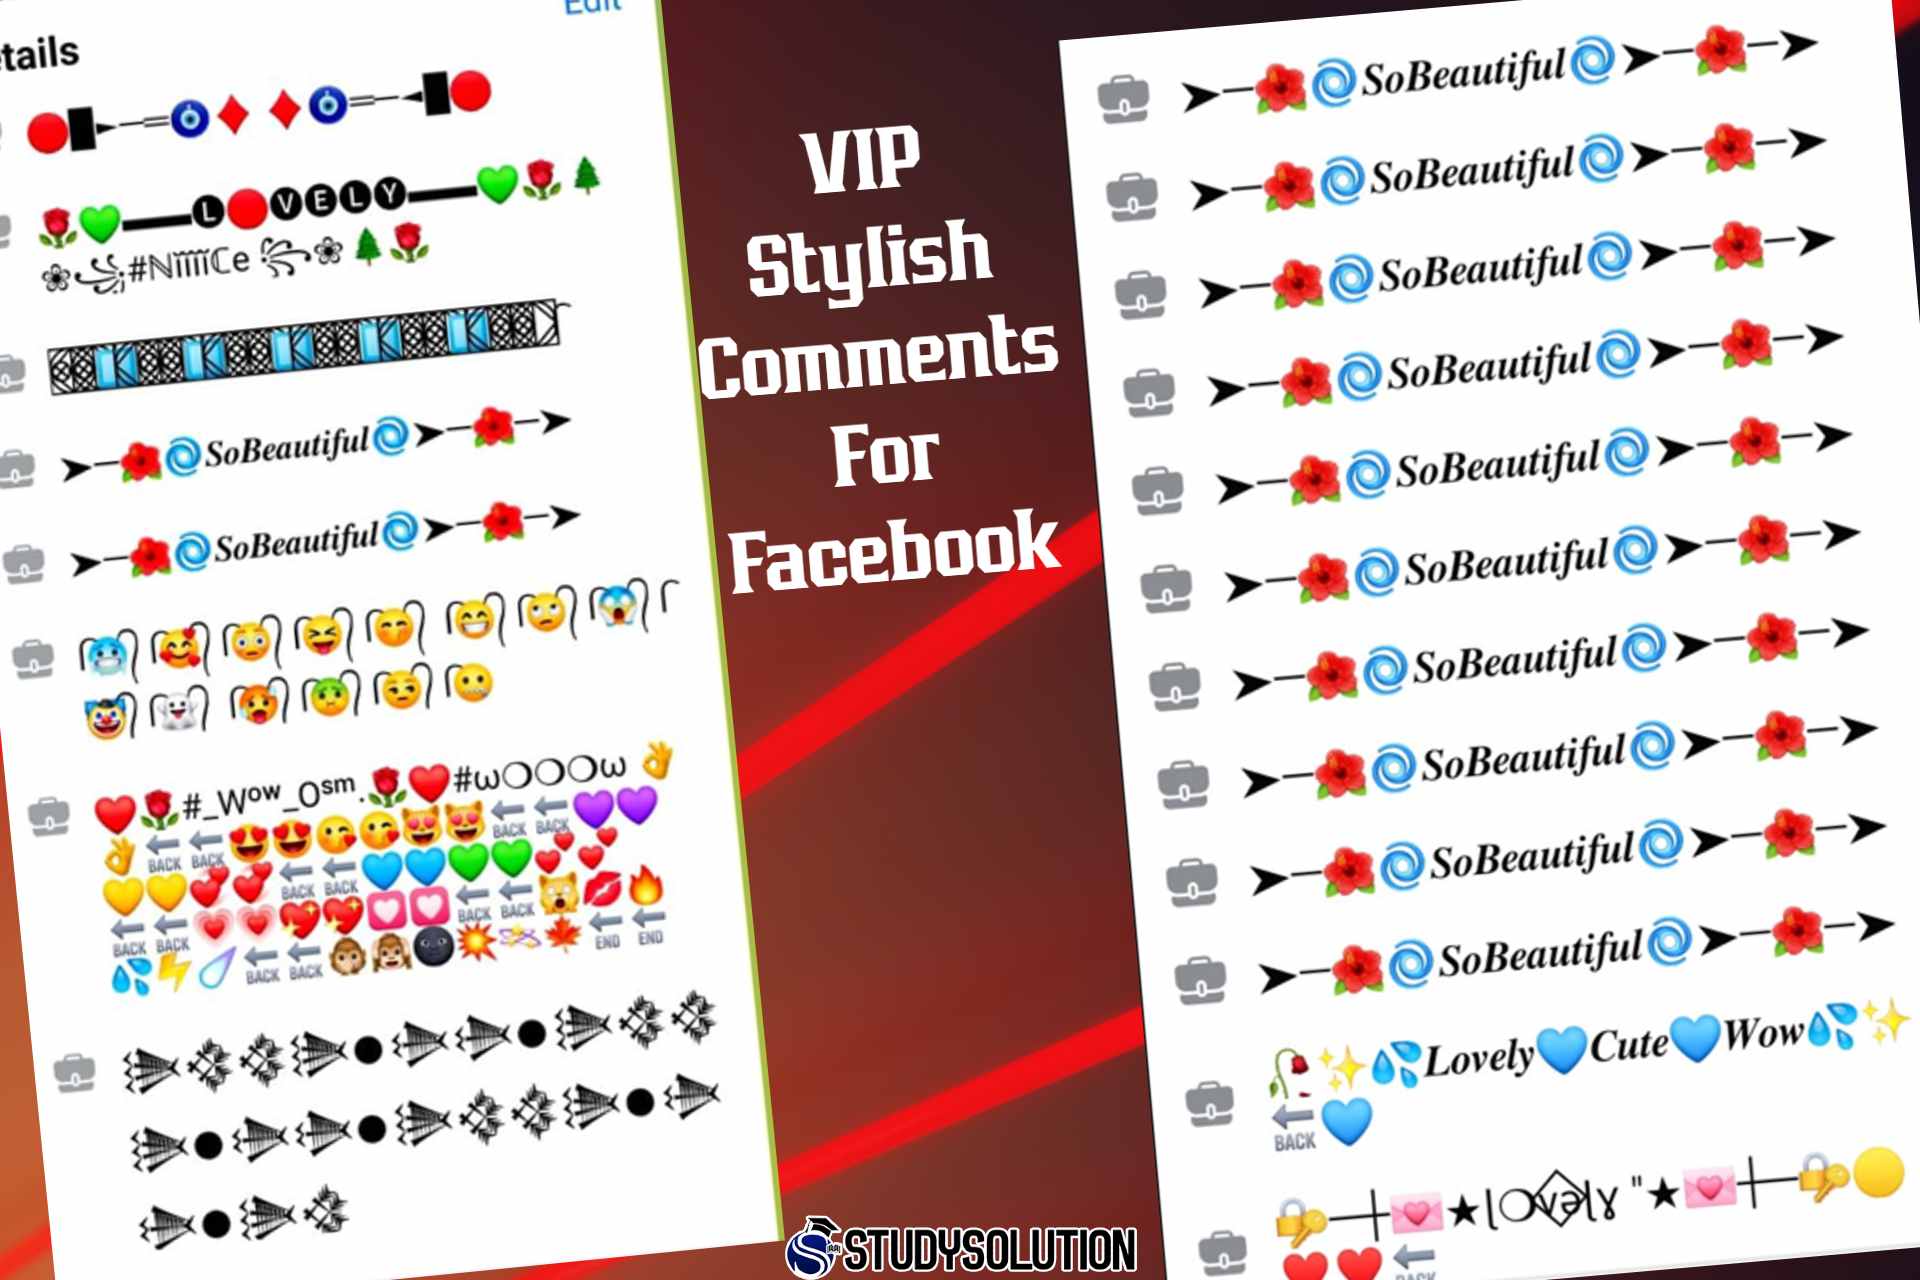 VIP Stylish Comments For Facebook